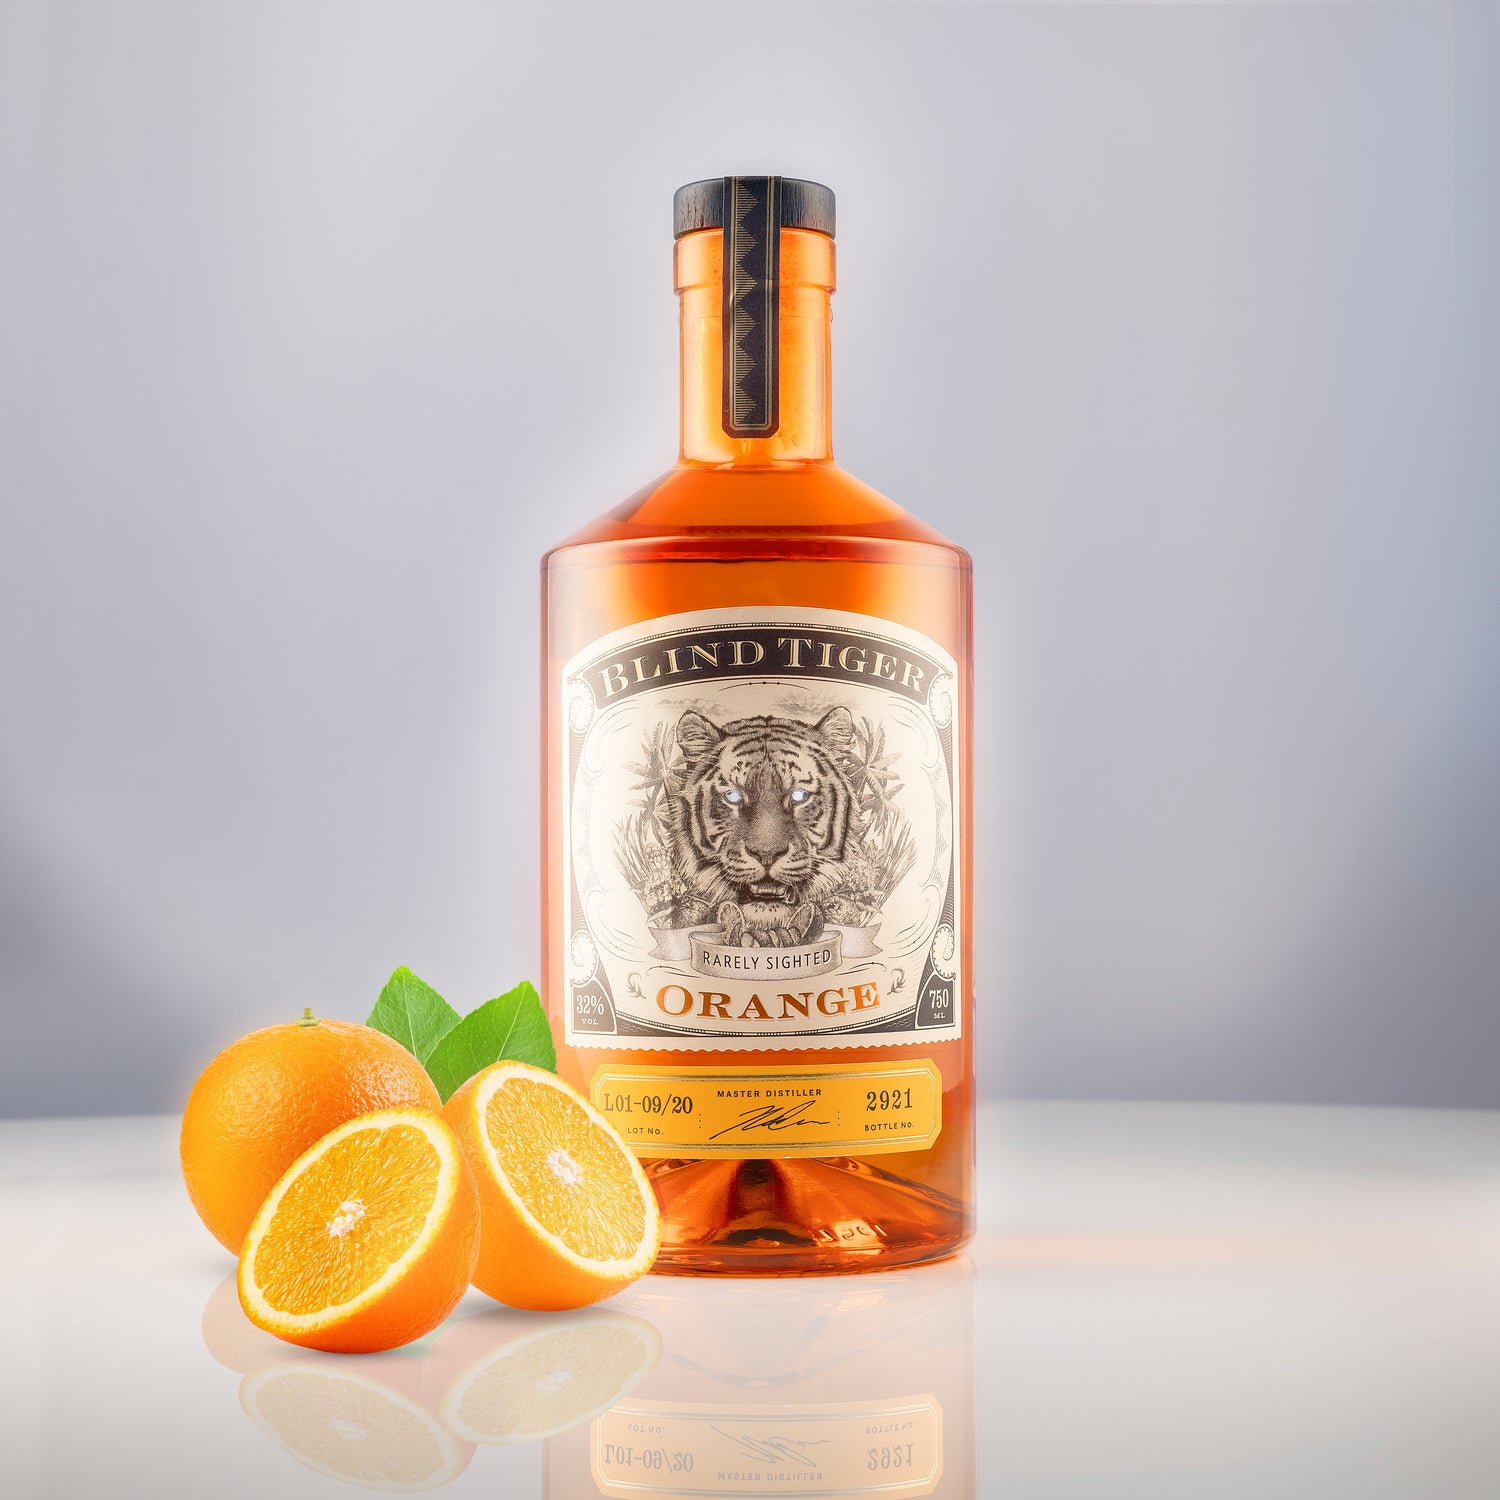 Blind Tiger Gin styled creative product photography